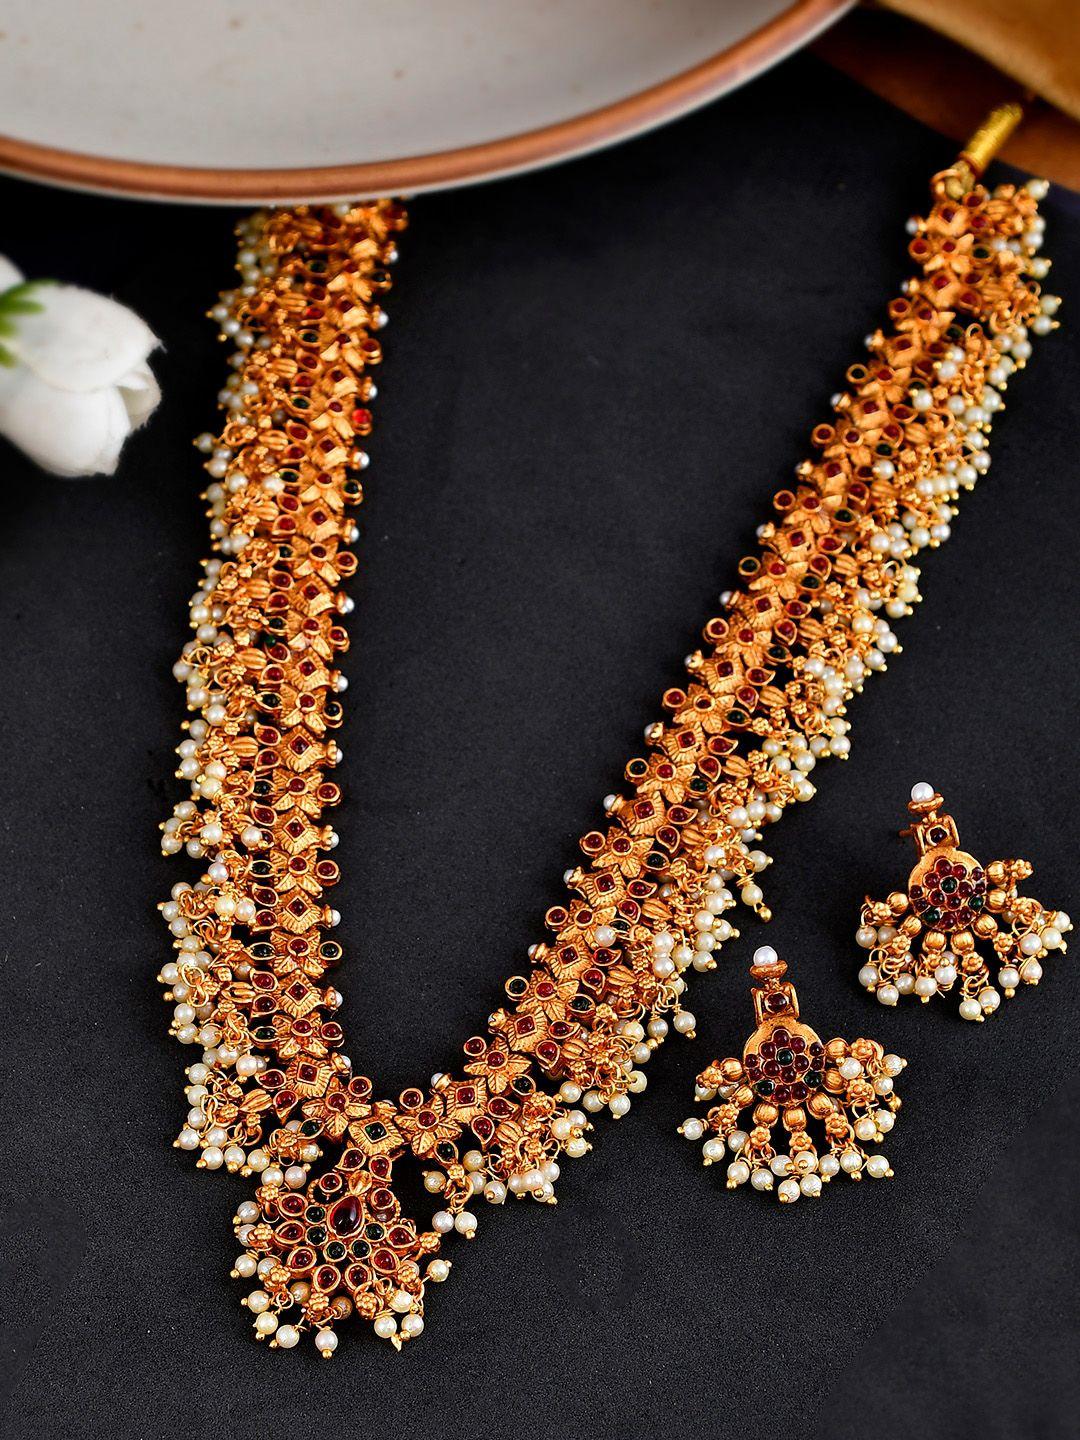 shoshaa-gold-plated-stone-studded-&-beaded-necklace-&-earrings